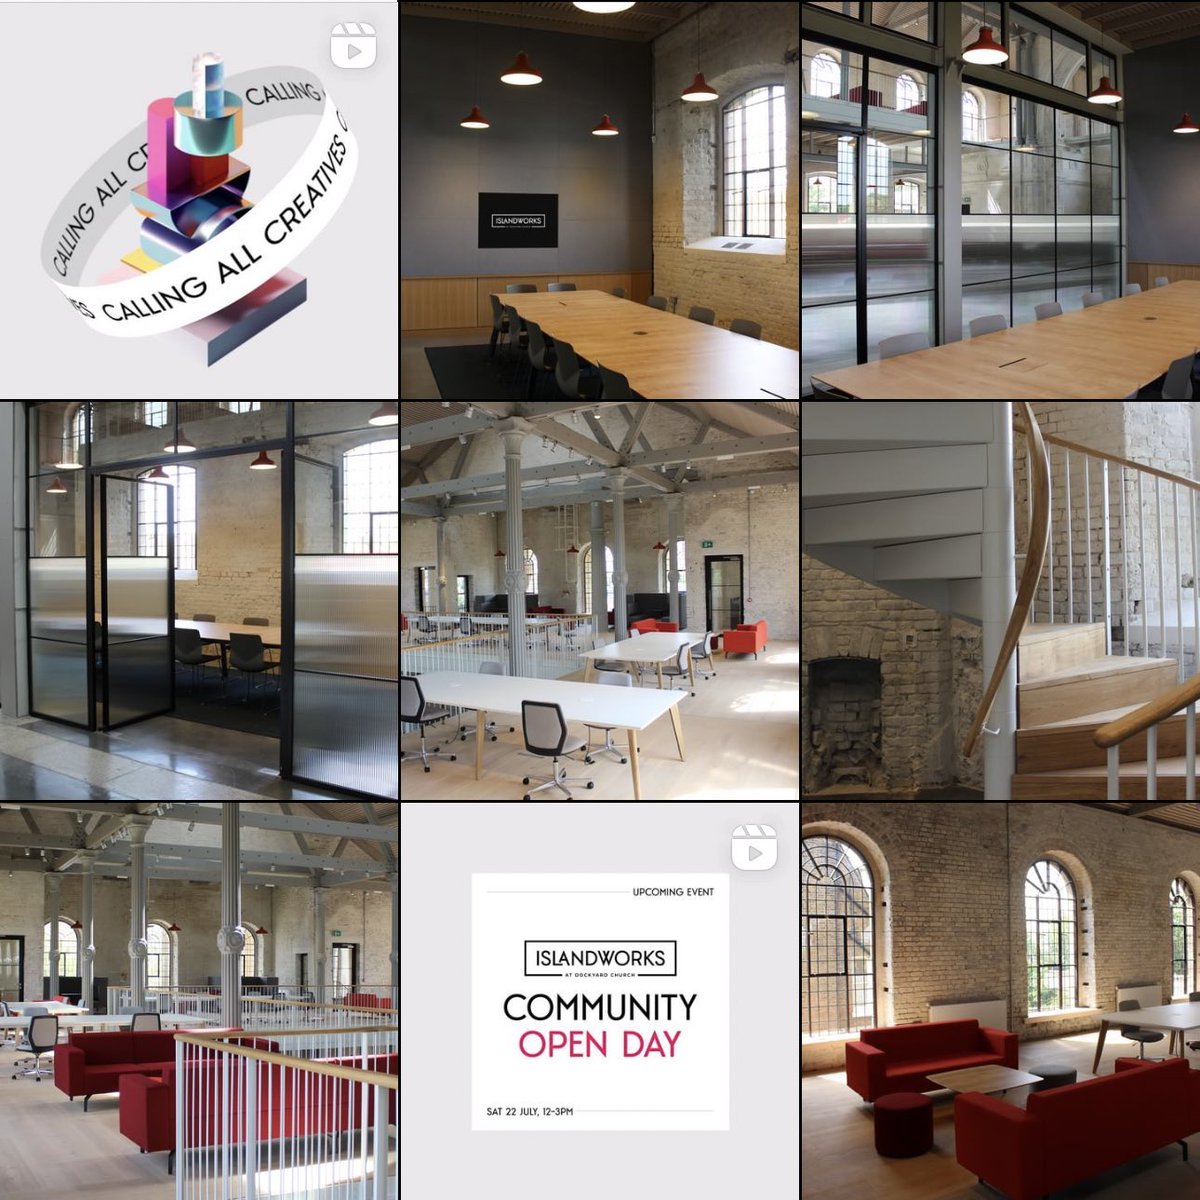 📢 Don’t forget you can book in a #Tour to view the #coworkingspace anytime! Choose a day and time that suits you 🥰

✍️ ✍️ calendly.com/islandworks/co…